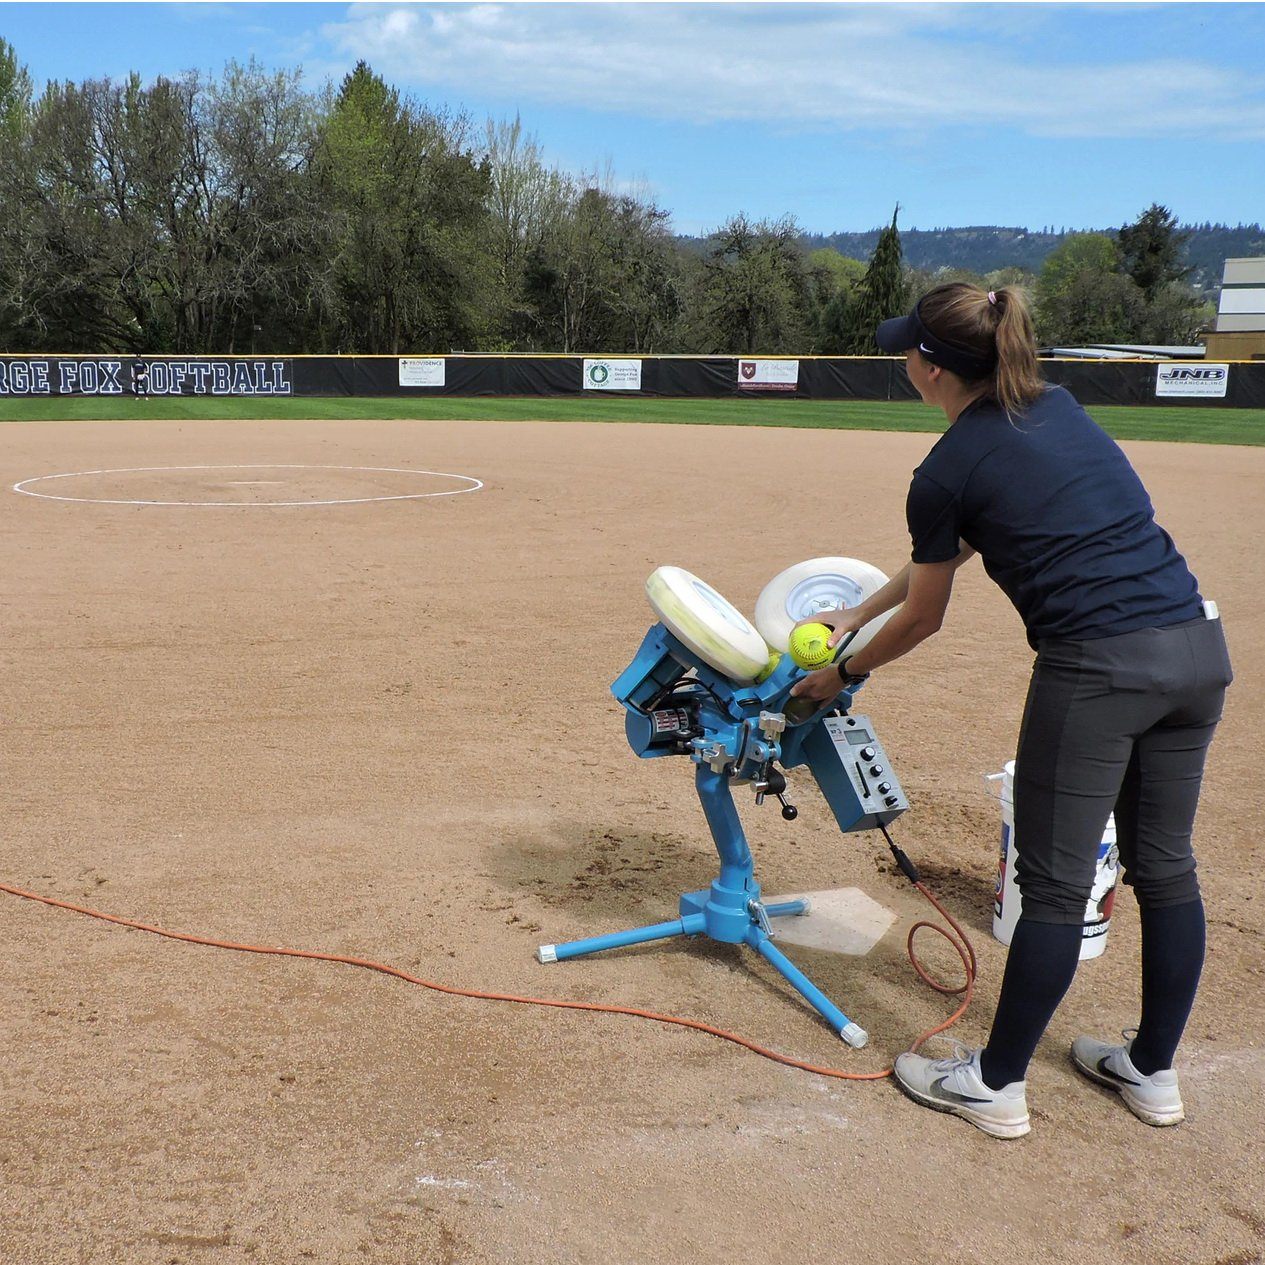 Jugs BP®3 Pitching Machine for Softball and Player 